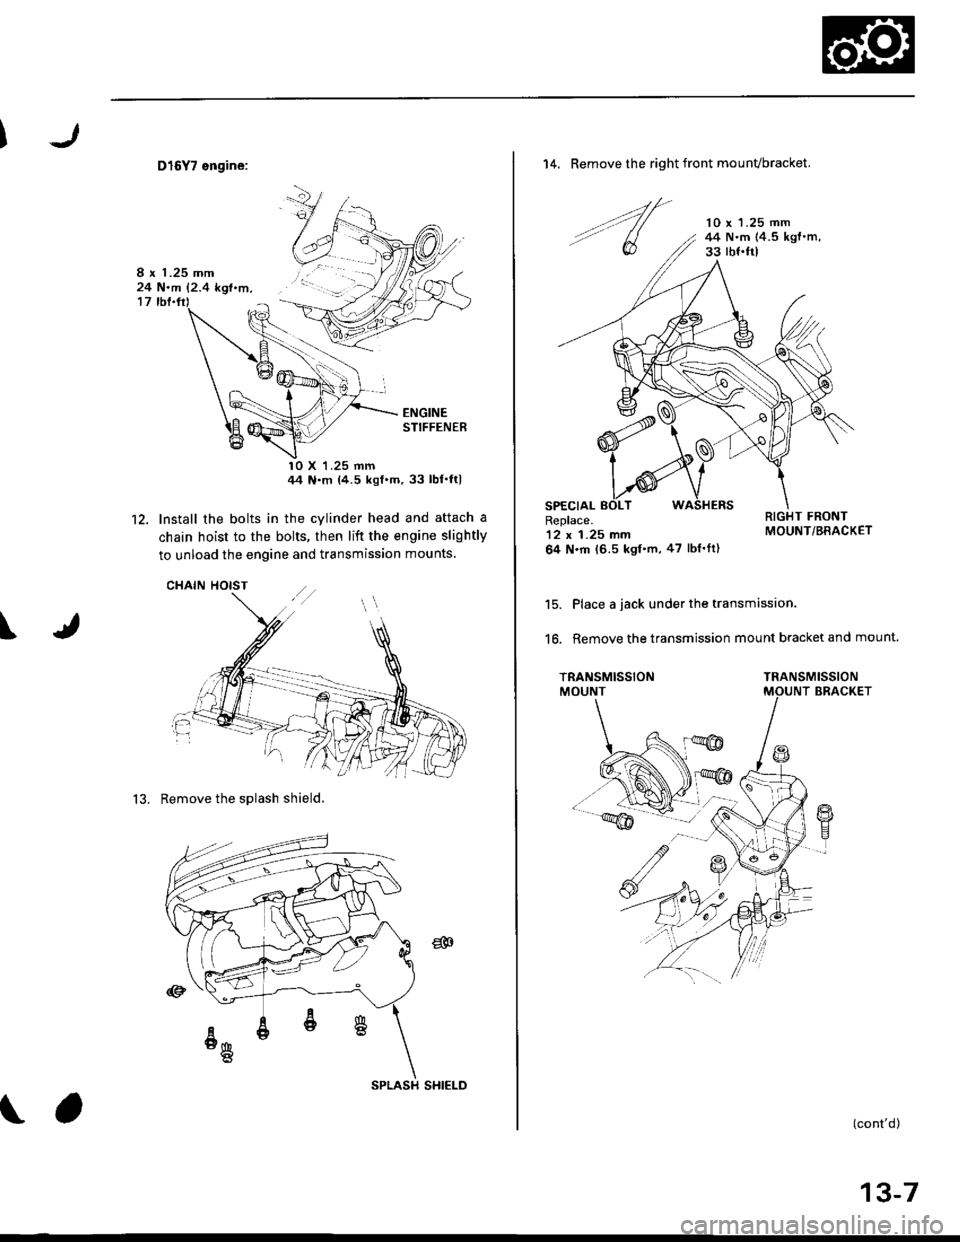 HONDA CIVIC 1996 6.G Service Manual 12.
D16Y7 engine:
ENGINESTIFFENER
10 X 1.25 mmIt4 Nm (4.5 kqfm,33 lbfltl
Install the bolts in the cylinder head and attach a
chain hoist to the bolts, then lift the engine slightly
to unload the en